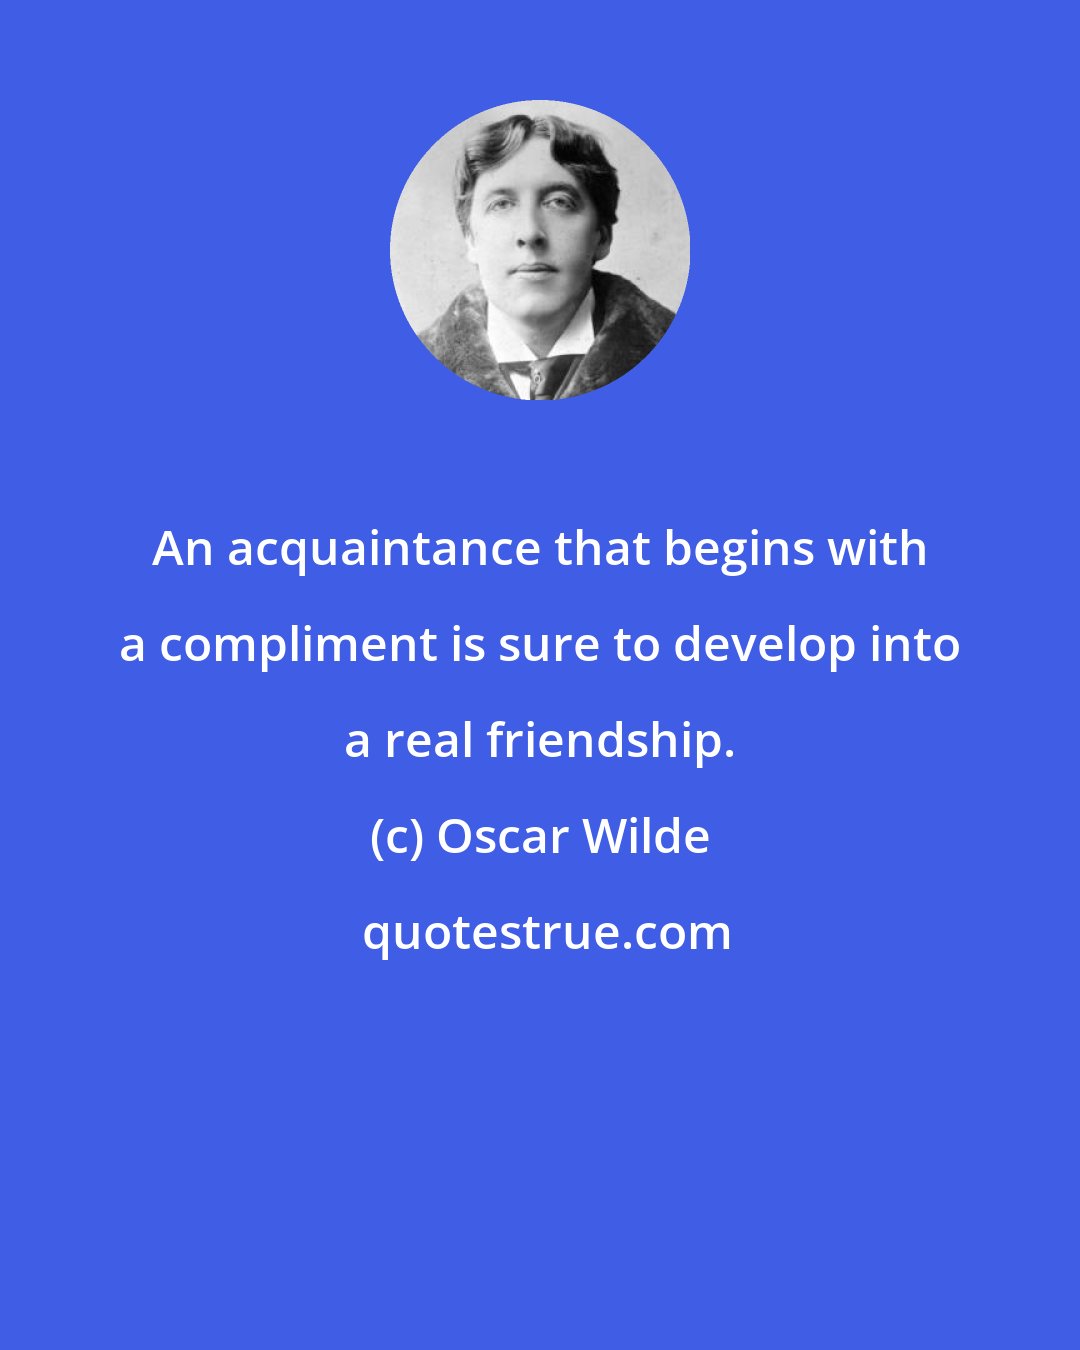 Oscar Wilde: An acquaintance that begins with a compliment is sure to develop into a real friendship.